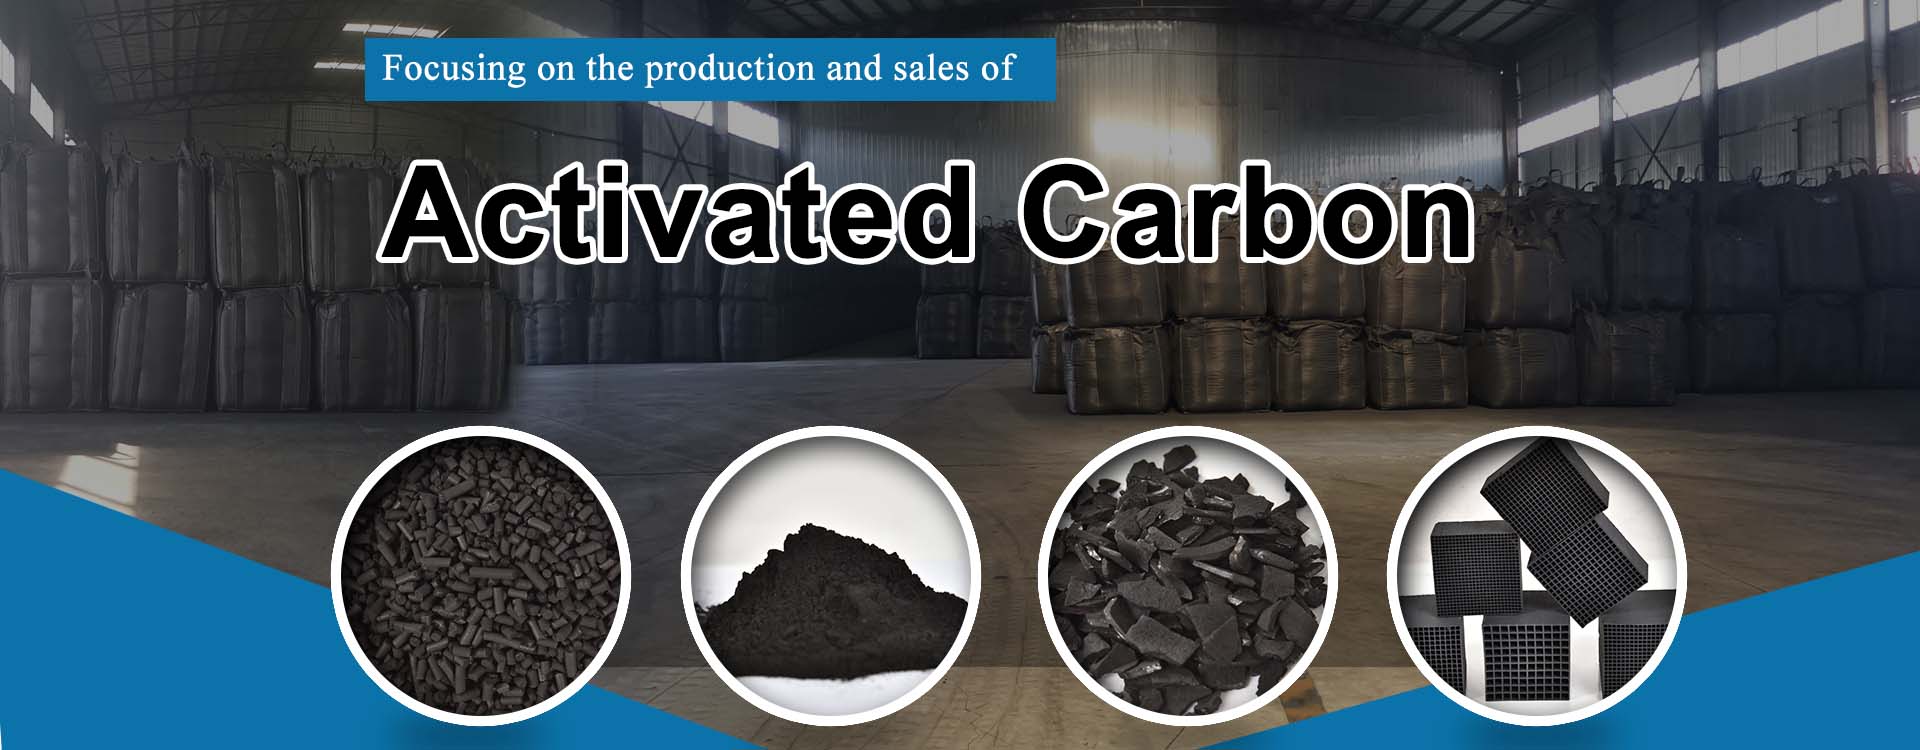 Activated Carbon Filter Material Product